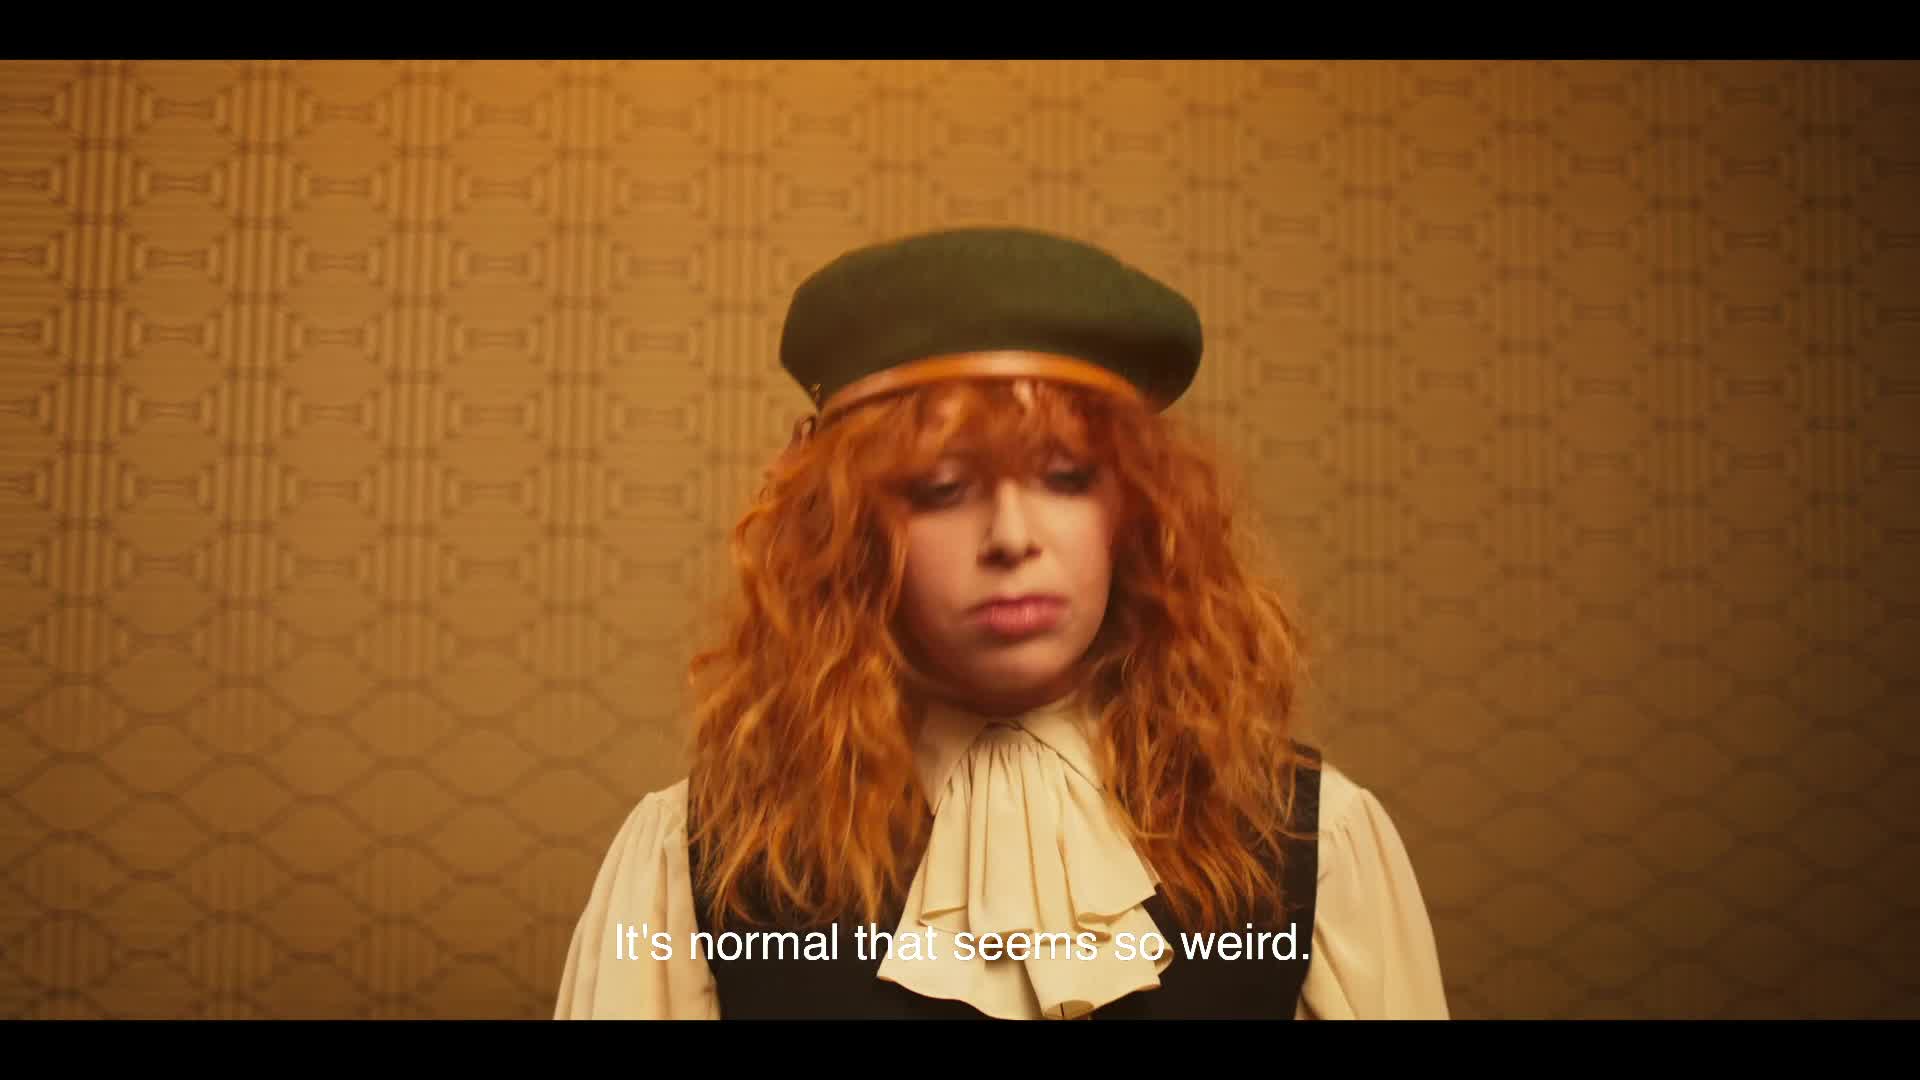 Directed by Amy Seimetz, ‘The Performers’ new film illuminates the inner psyche of Natasha Lyonne, as she explores the creative process behind her hypnotic on-screen presence. Watch the full video on.gucci.com/ThePerformersActIVNatashaLyonne_.